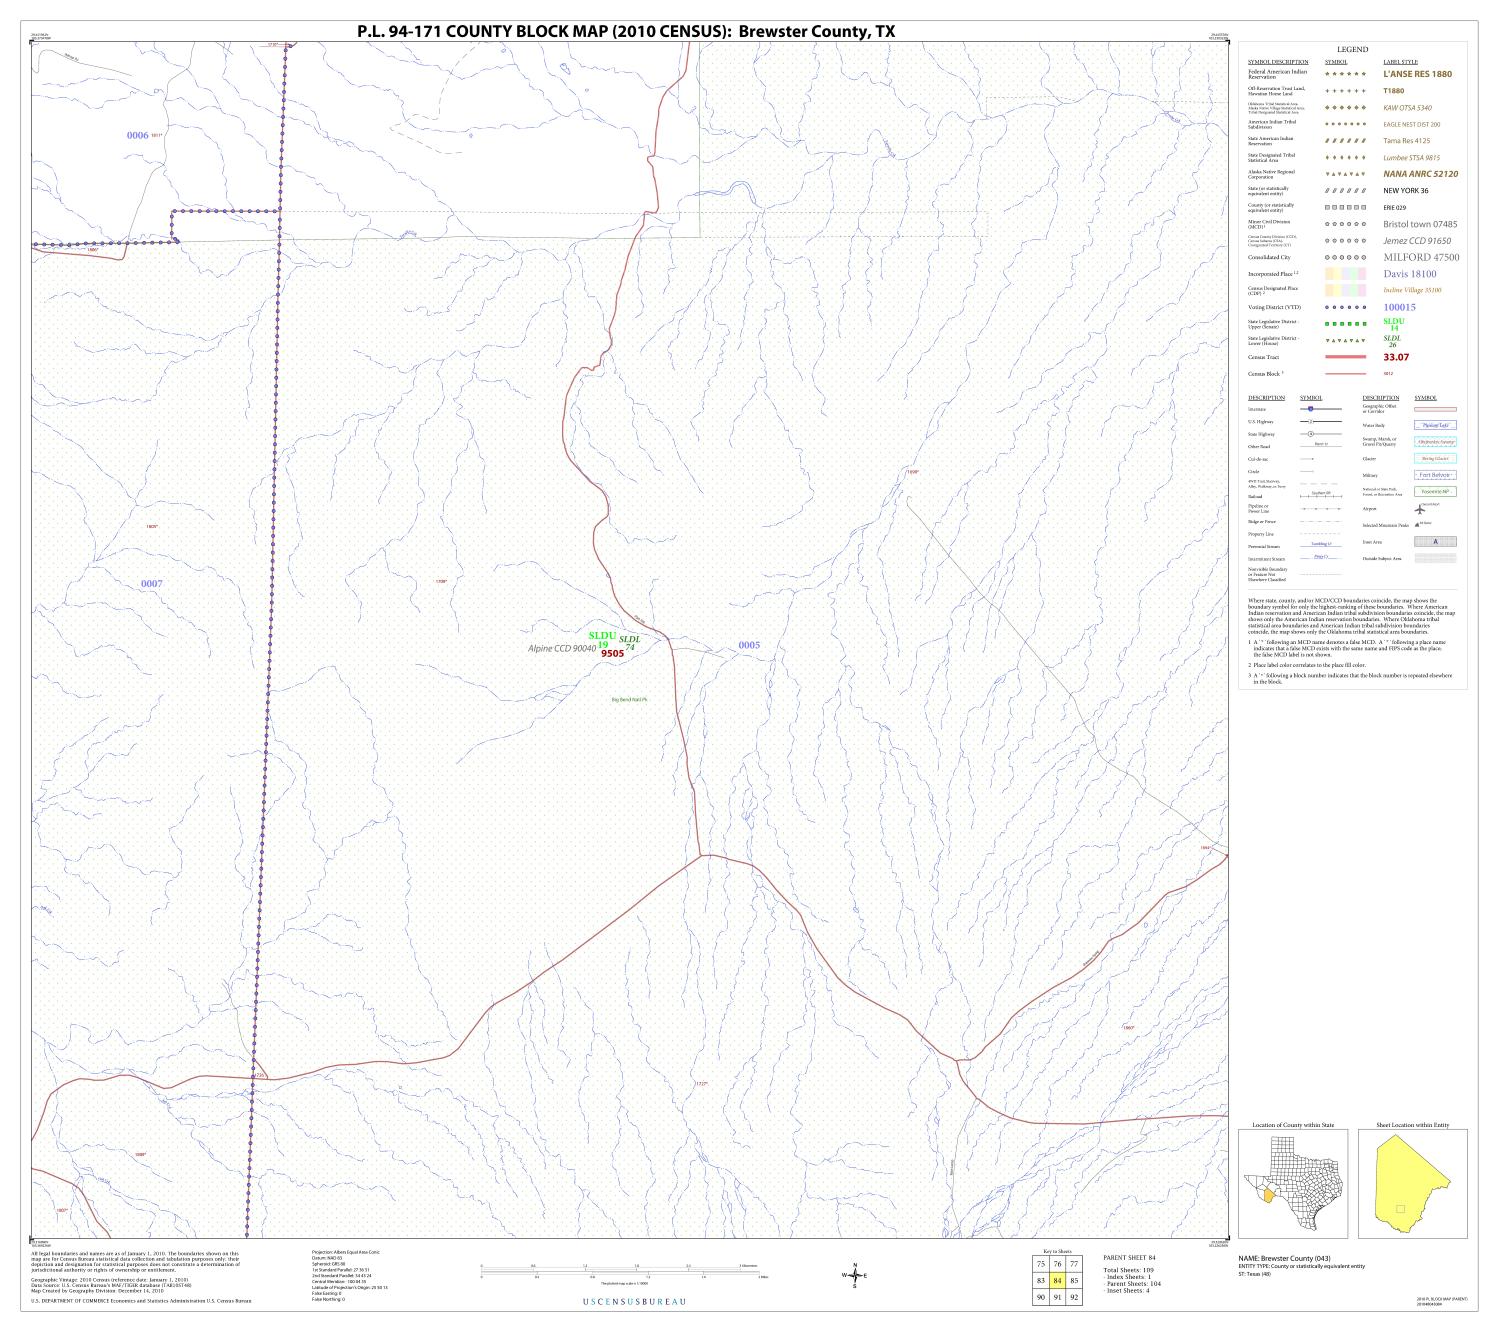 P.L. 94-171 County Block Map (2010 Census): Brewster County, Block 84
                                                
                                                    [Sequence #]: 1 of 1
                                                